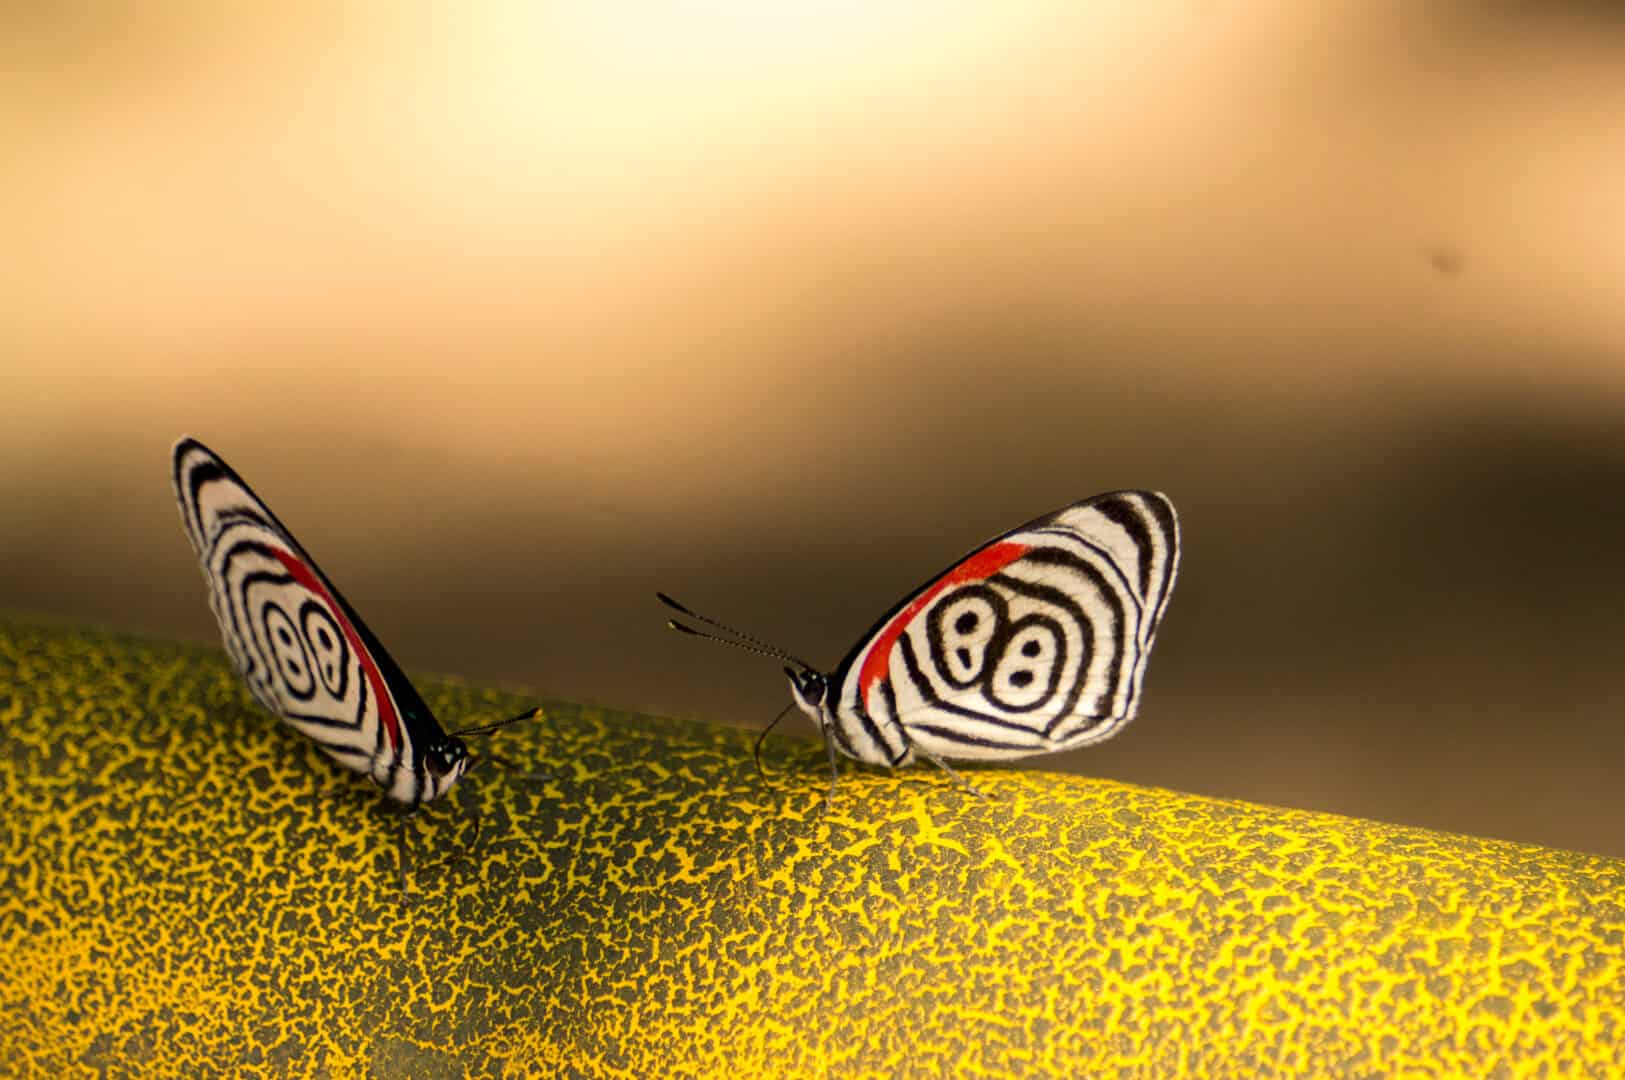 butterfly with unique 88 marking on wings